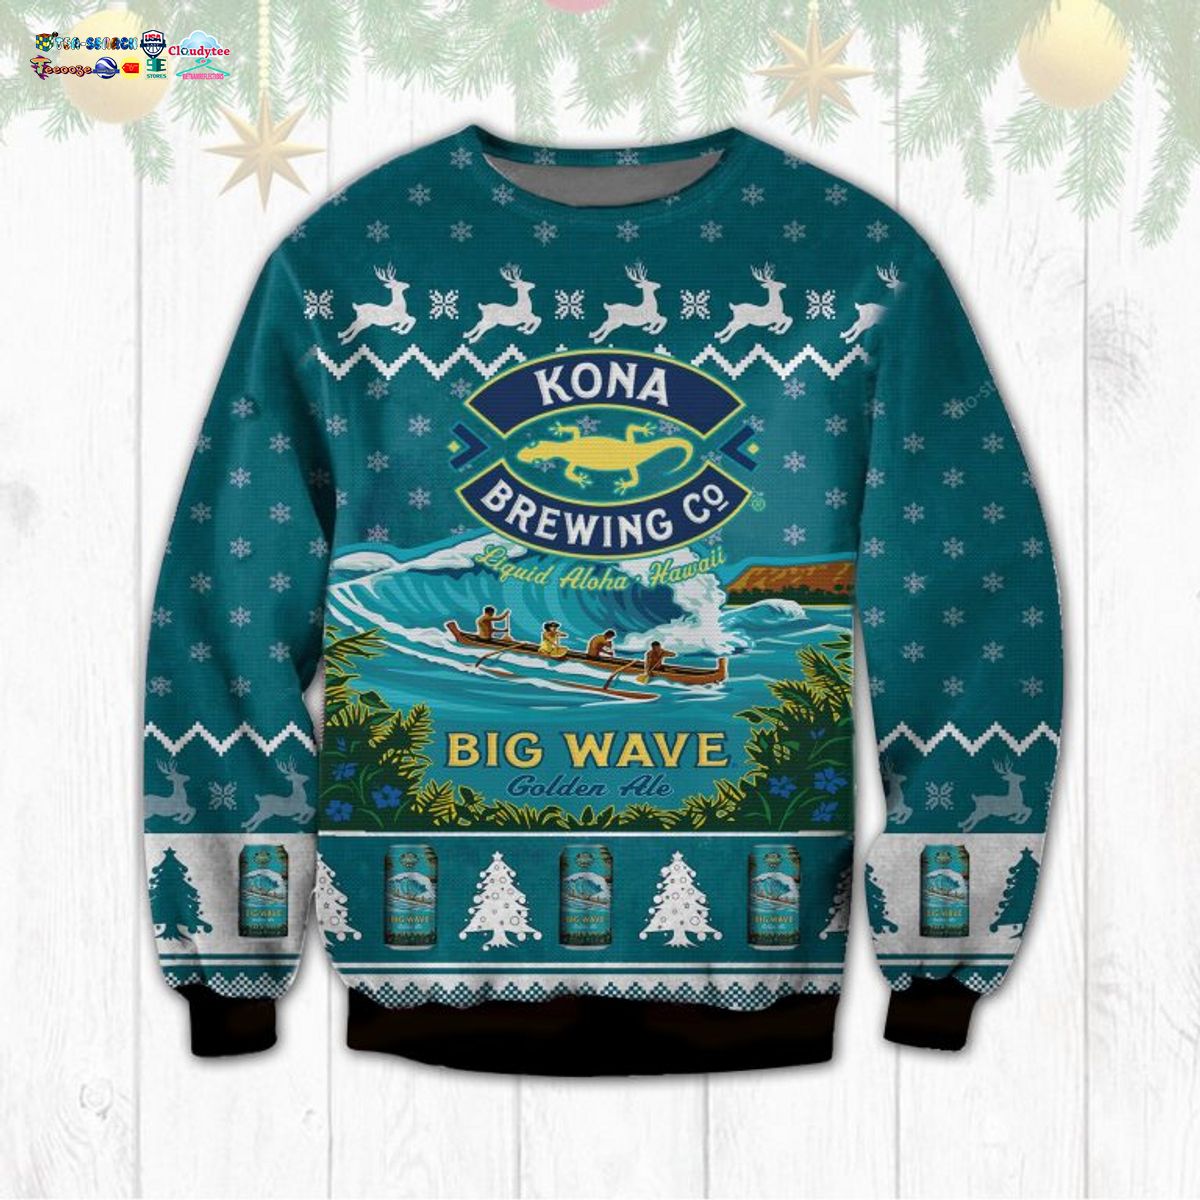 Kona Brewing Ugly Christmas Sweater - Best picture ever